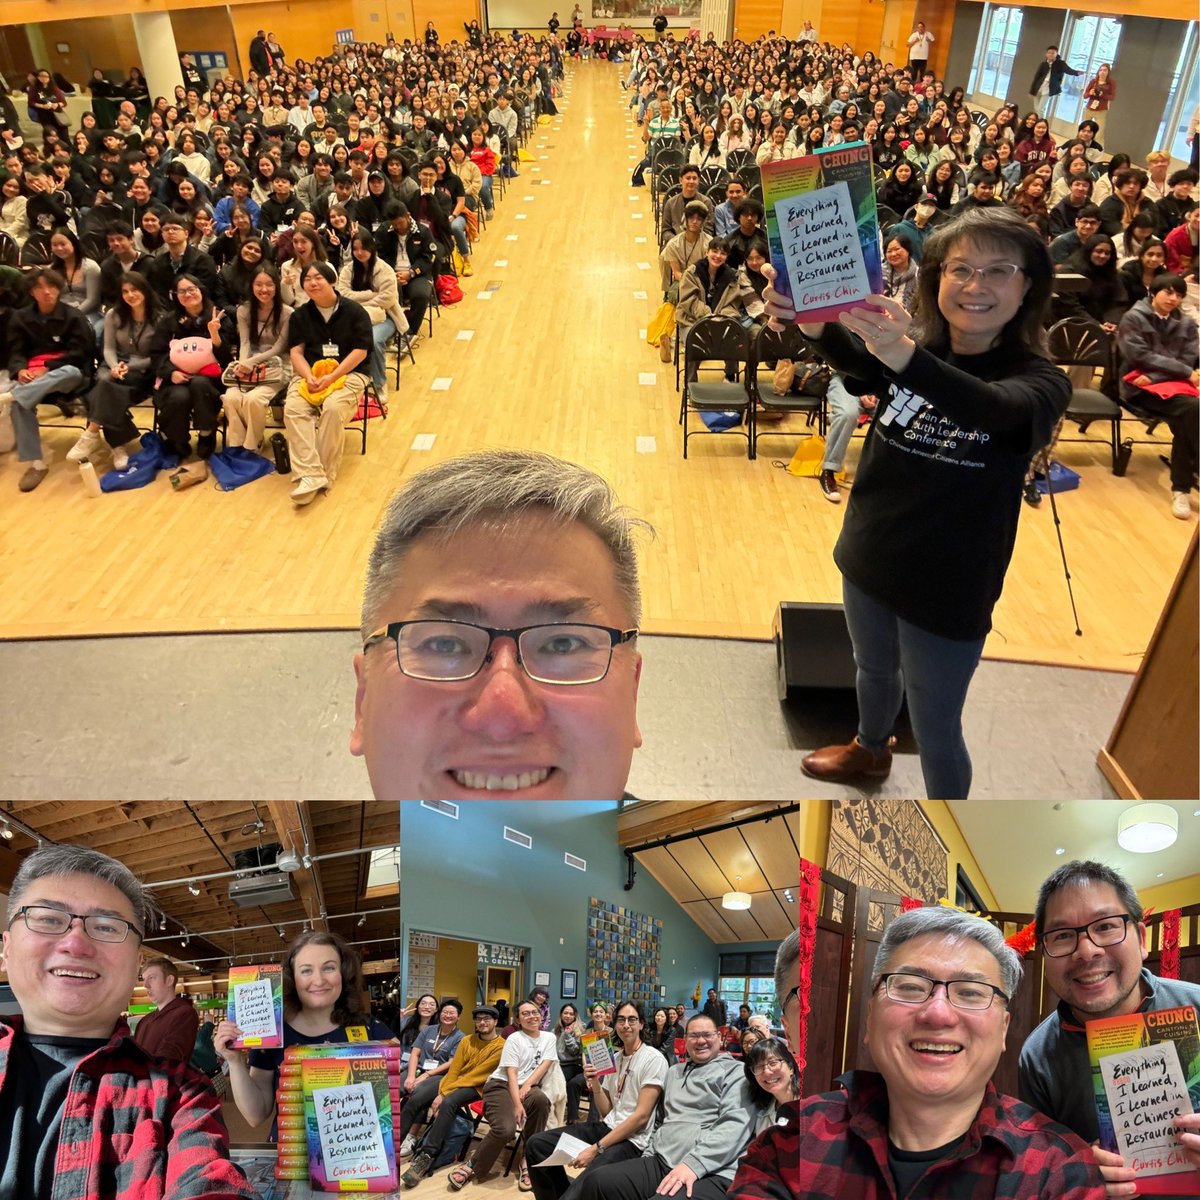 What a great day! Thnx @aaylc_pdx!!! Over 500 bright high school students in the room! Then a quick drive down to @sol_qtpoc_osu @osupridecenter @osuapcc to complete my doubleheader! Even made a quick stop to @powellsbooks to sign my books! Go #Oregon! @littlebrown